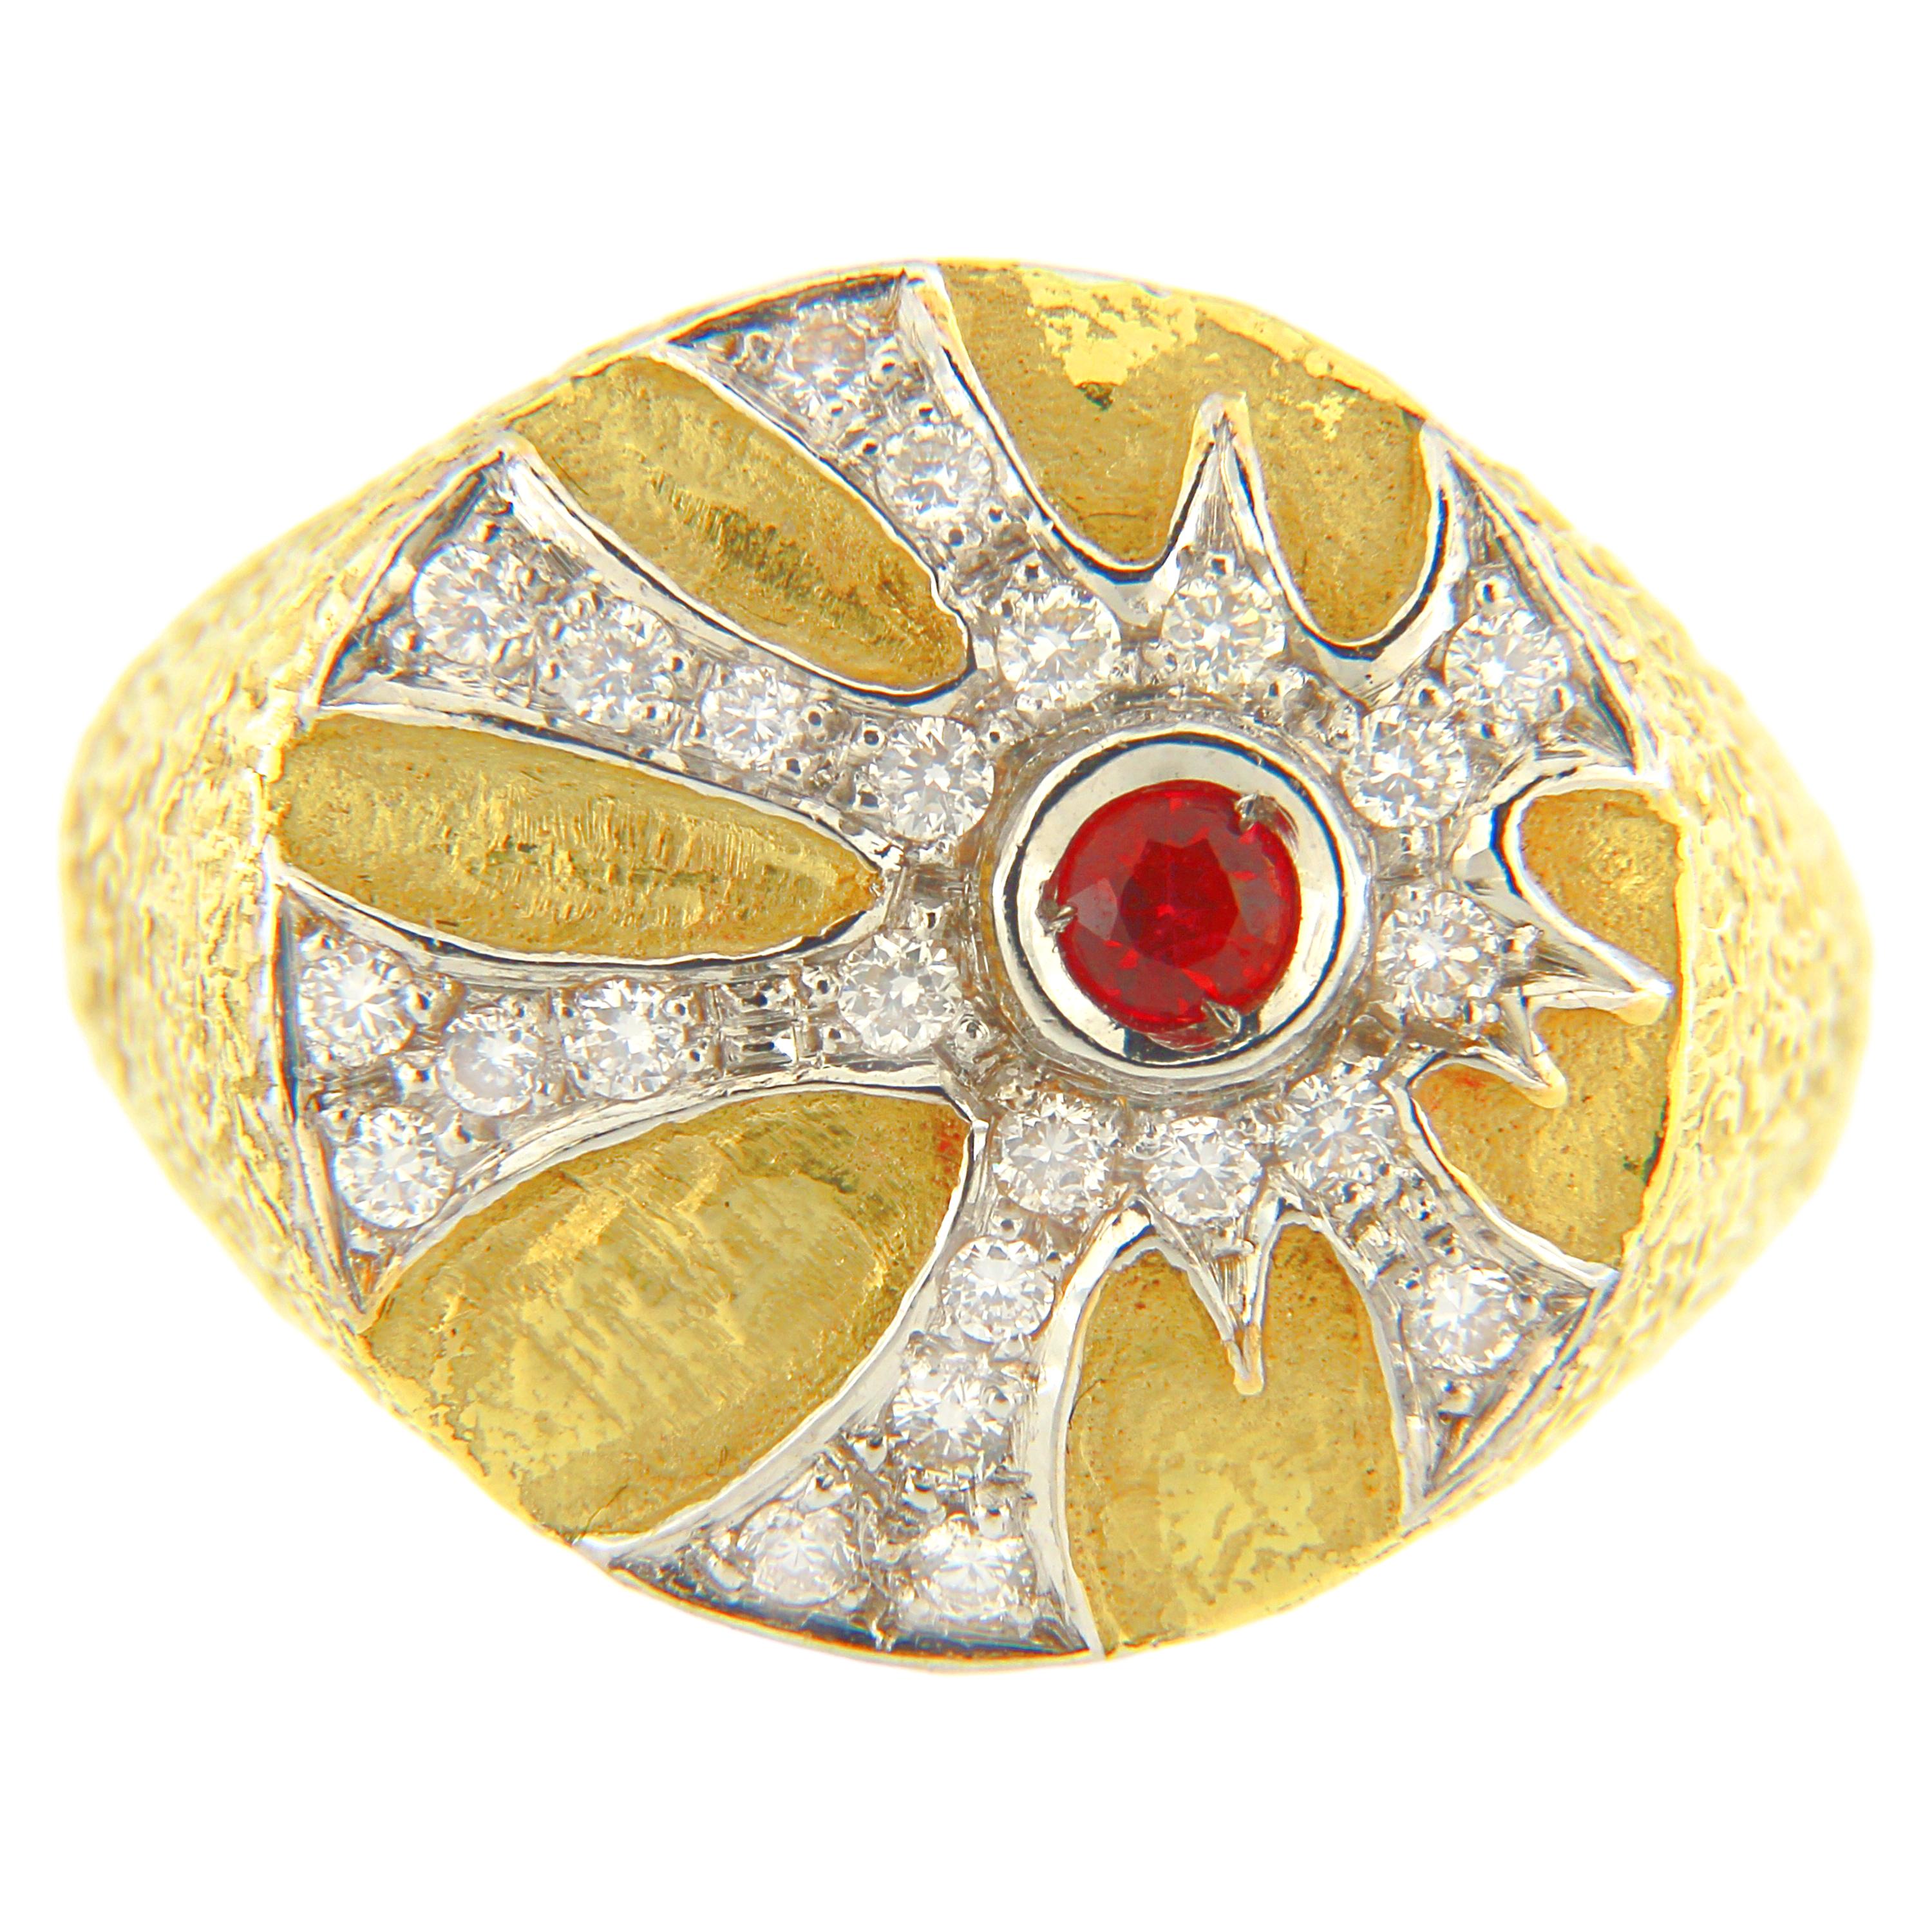 Exquisite Ruby and Diamonds Satin Yellow Gold Cocktail Ring, from Sacchi’s 